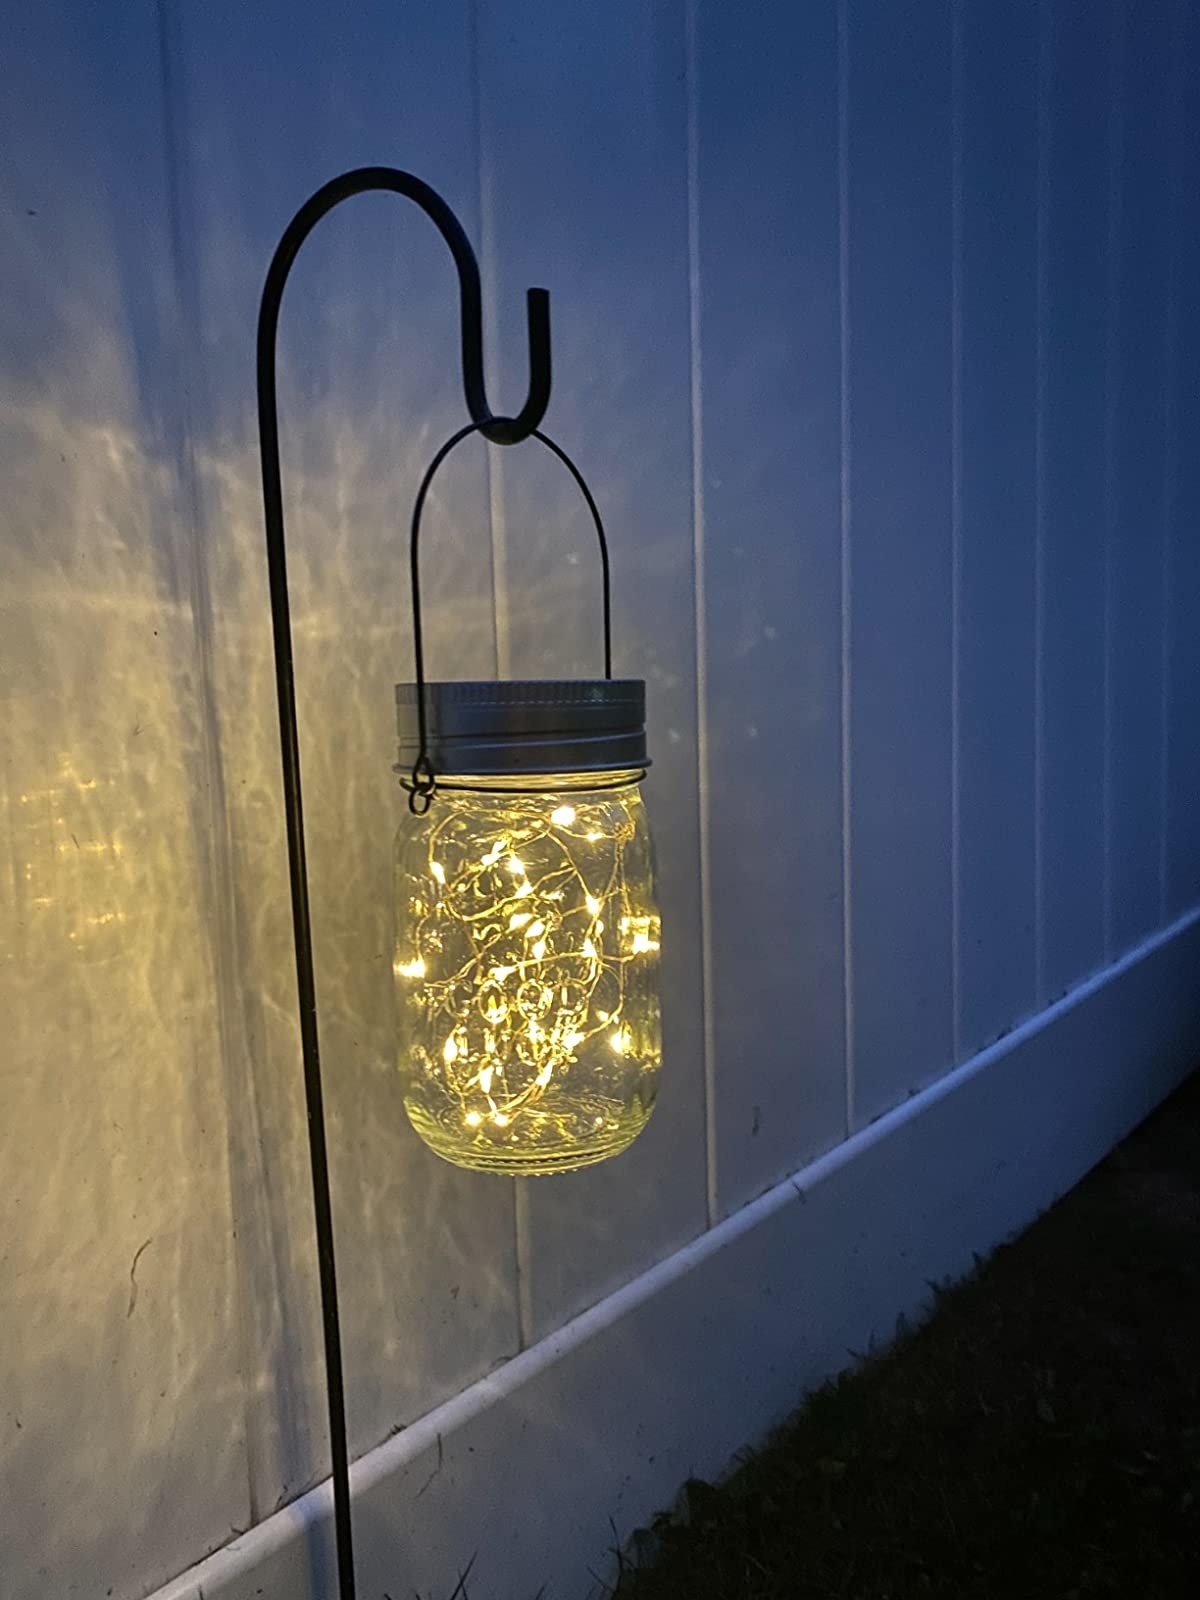 Reviewer image of the mason jar light in their backyard